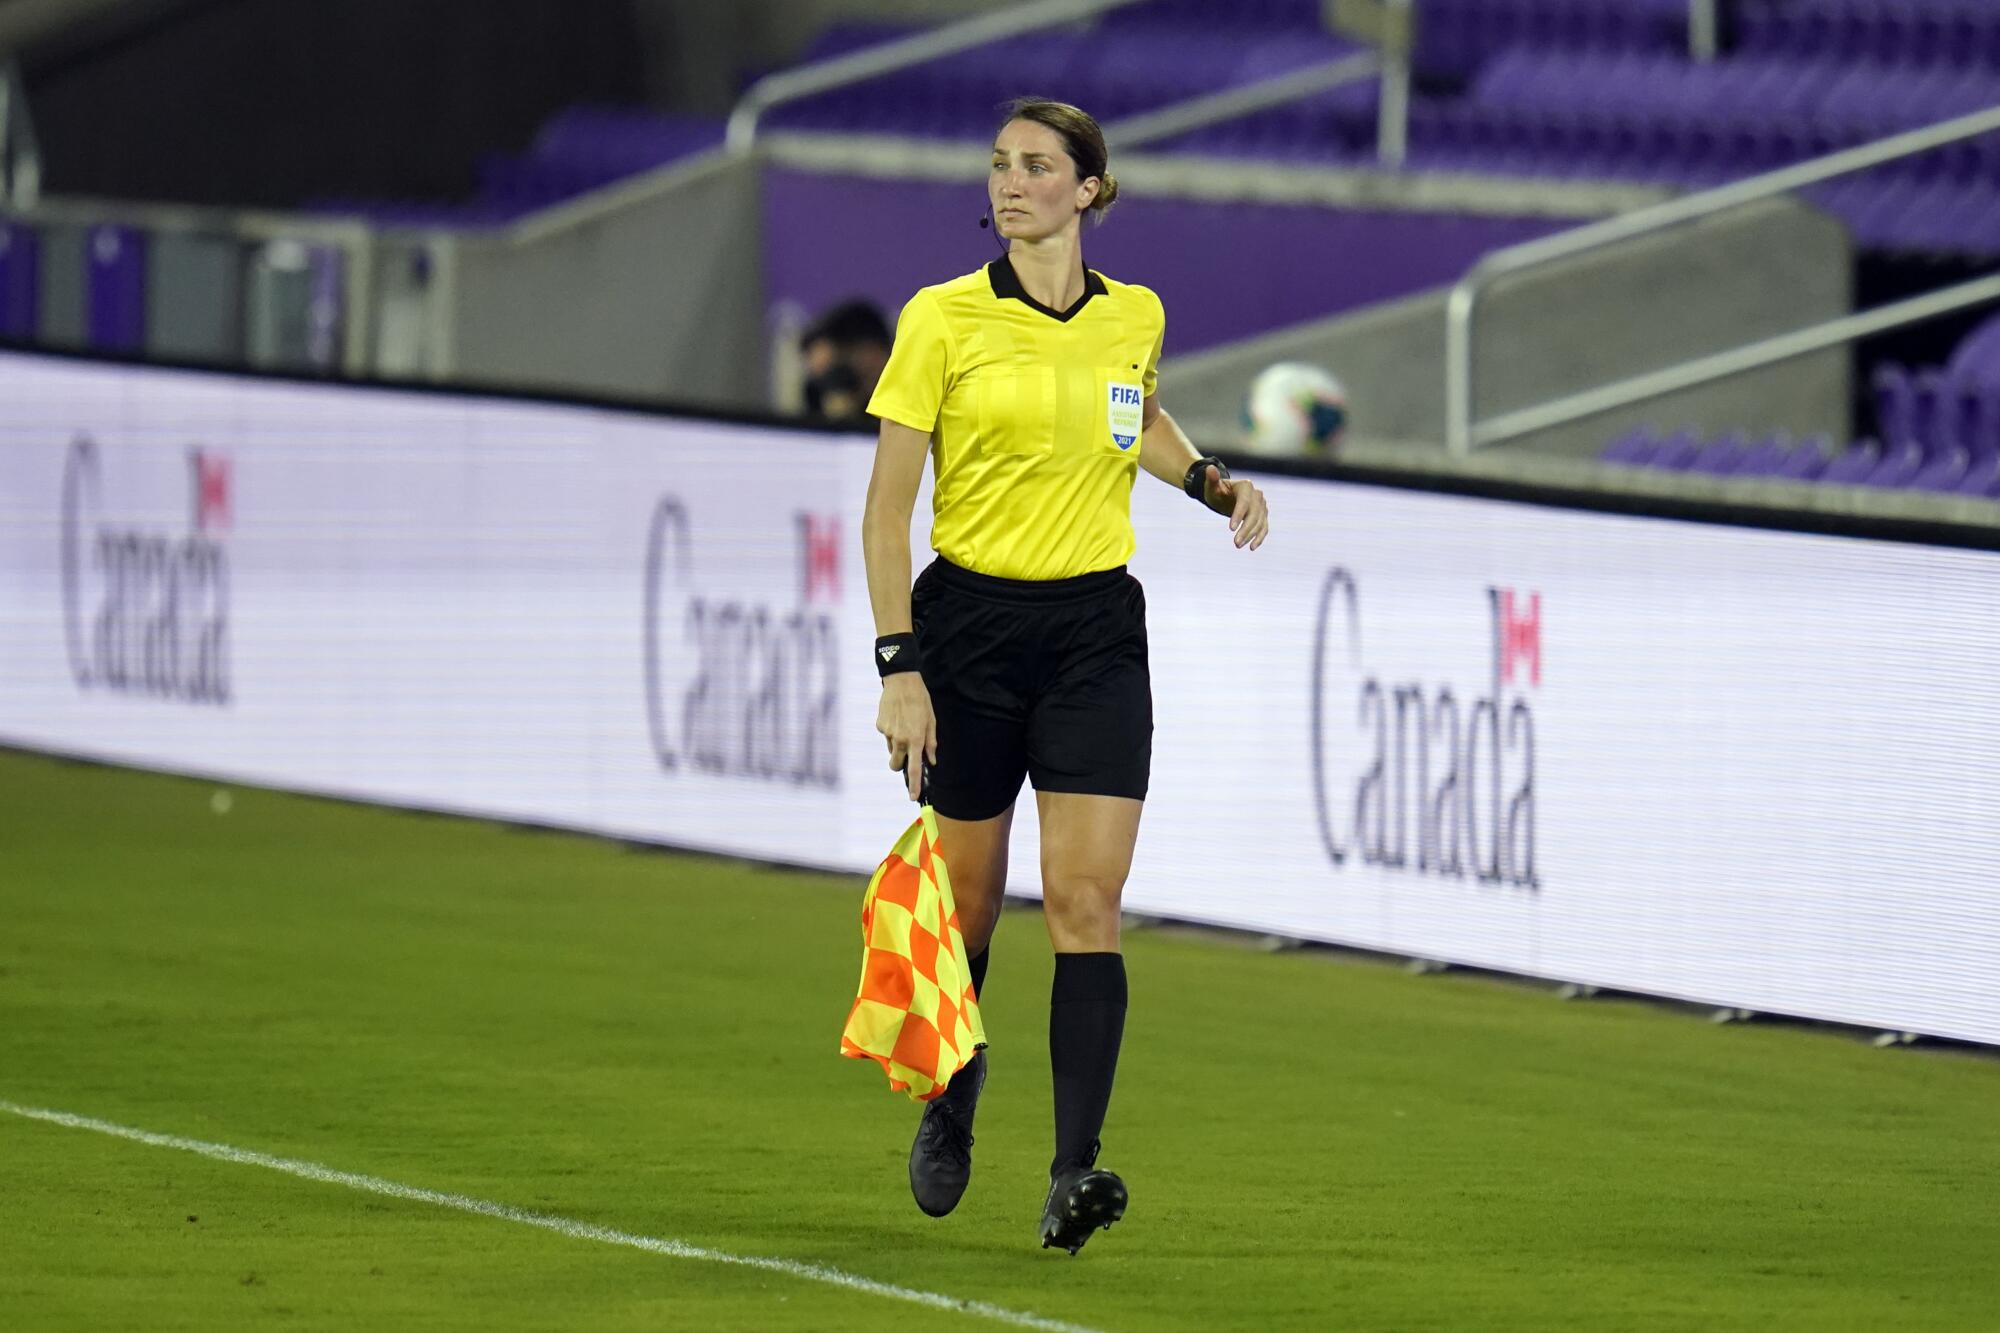 Assistant referee Kathryn Nesbitt runs the sideline during a Bermuda-Canada World Cup qualifying match on March 25, 2021.